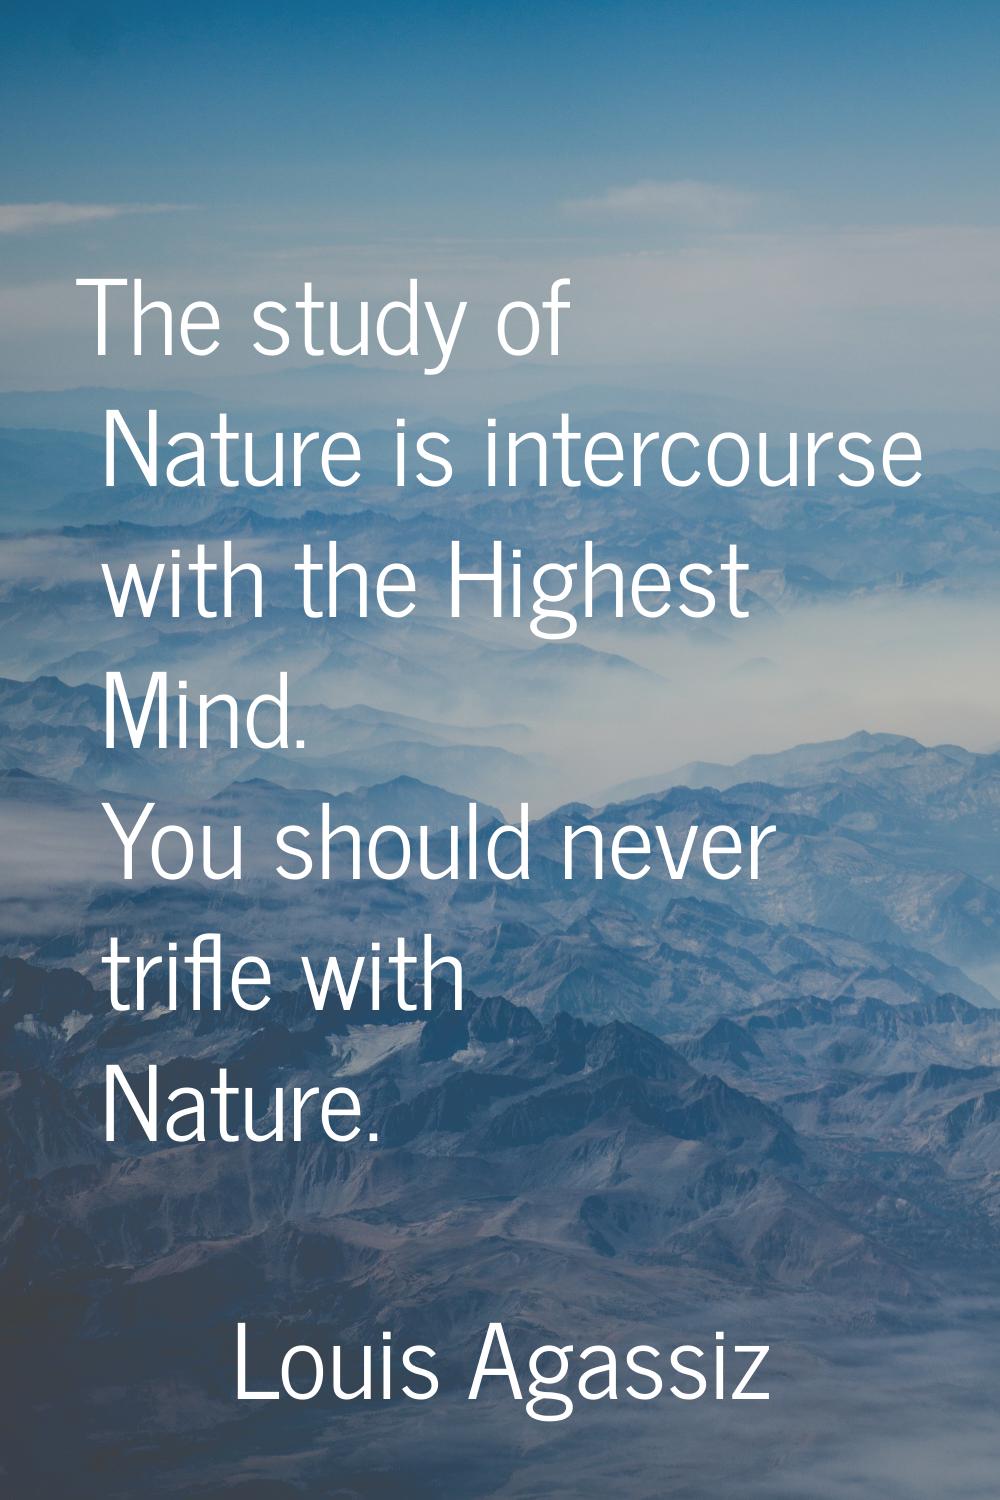 The study of Nature is intercourse with the Highest Mind. You should never trifle with Nature.